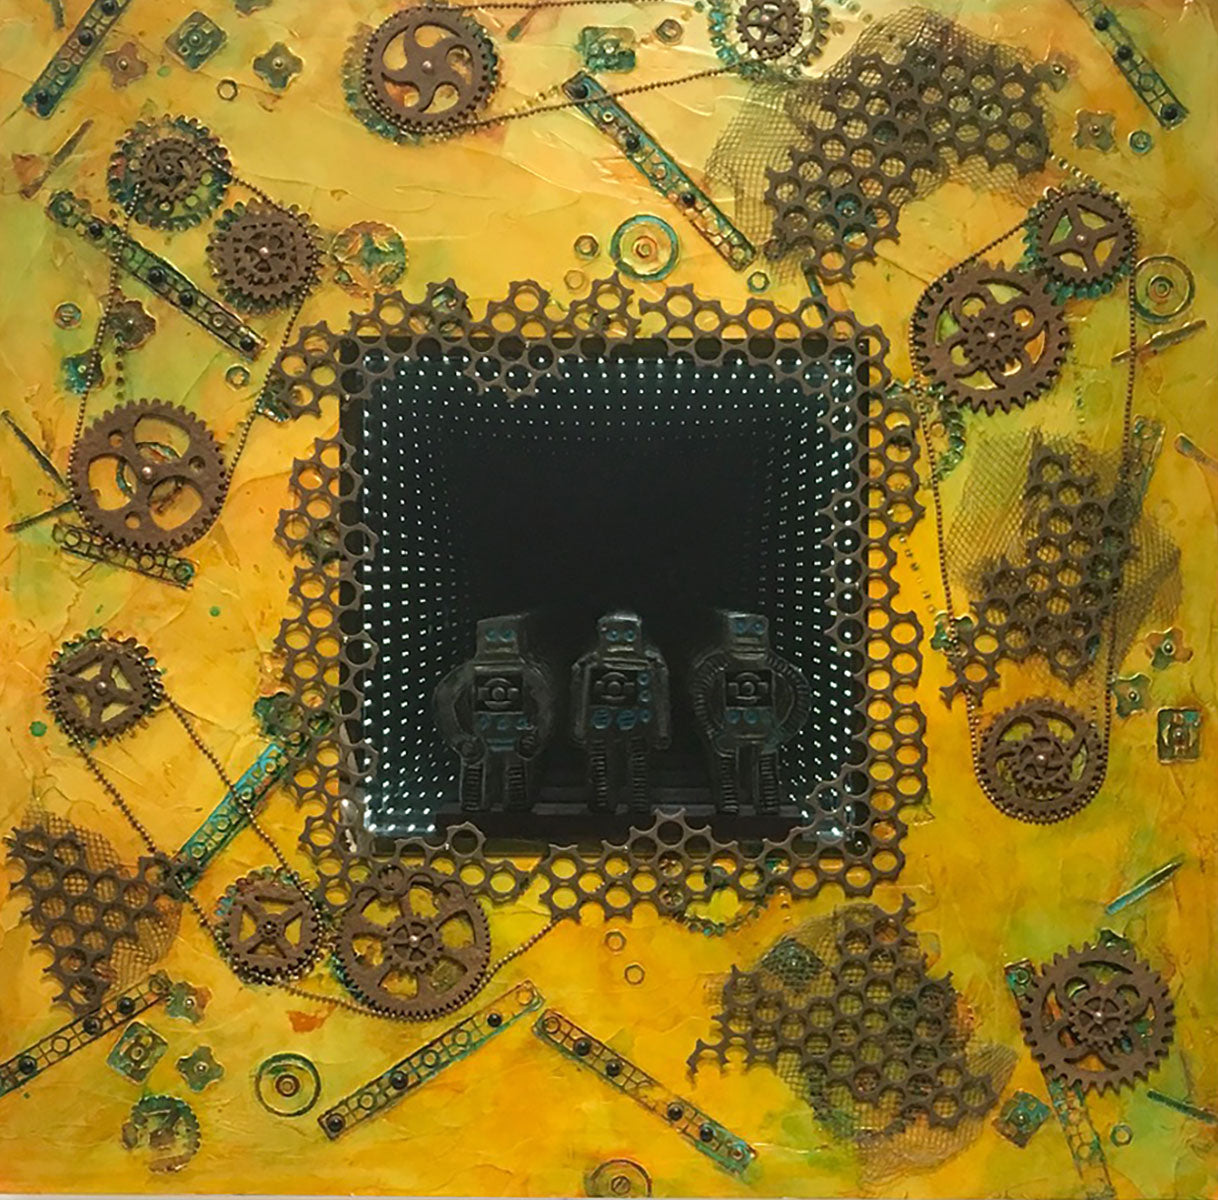 DESTINATION UNLIMITED, Mixed Media on Board, LED lights, 40"W x 40"H, 3"D, 2018